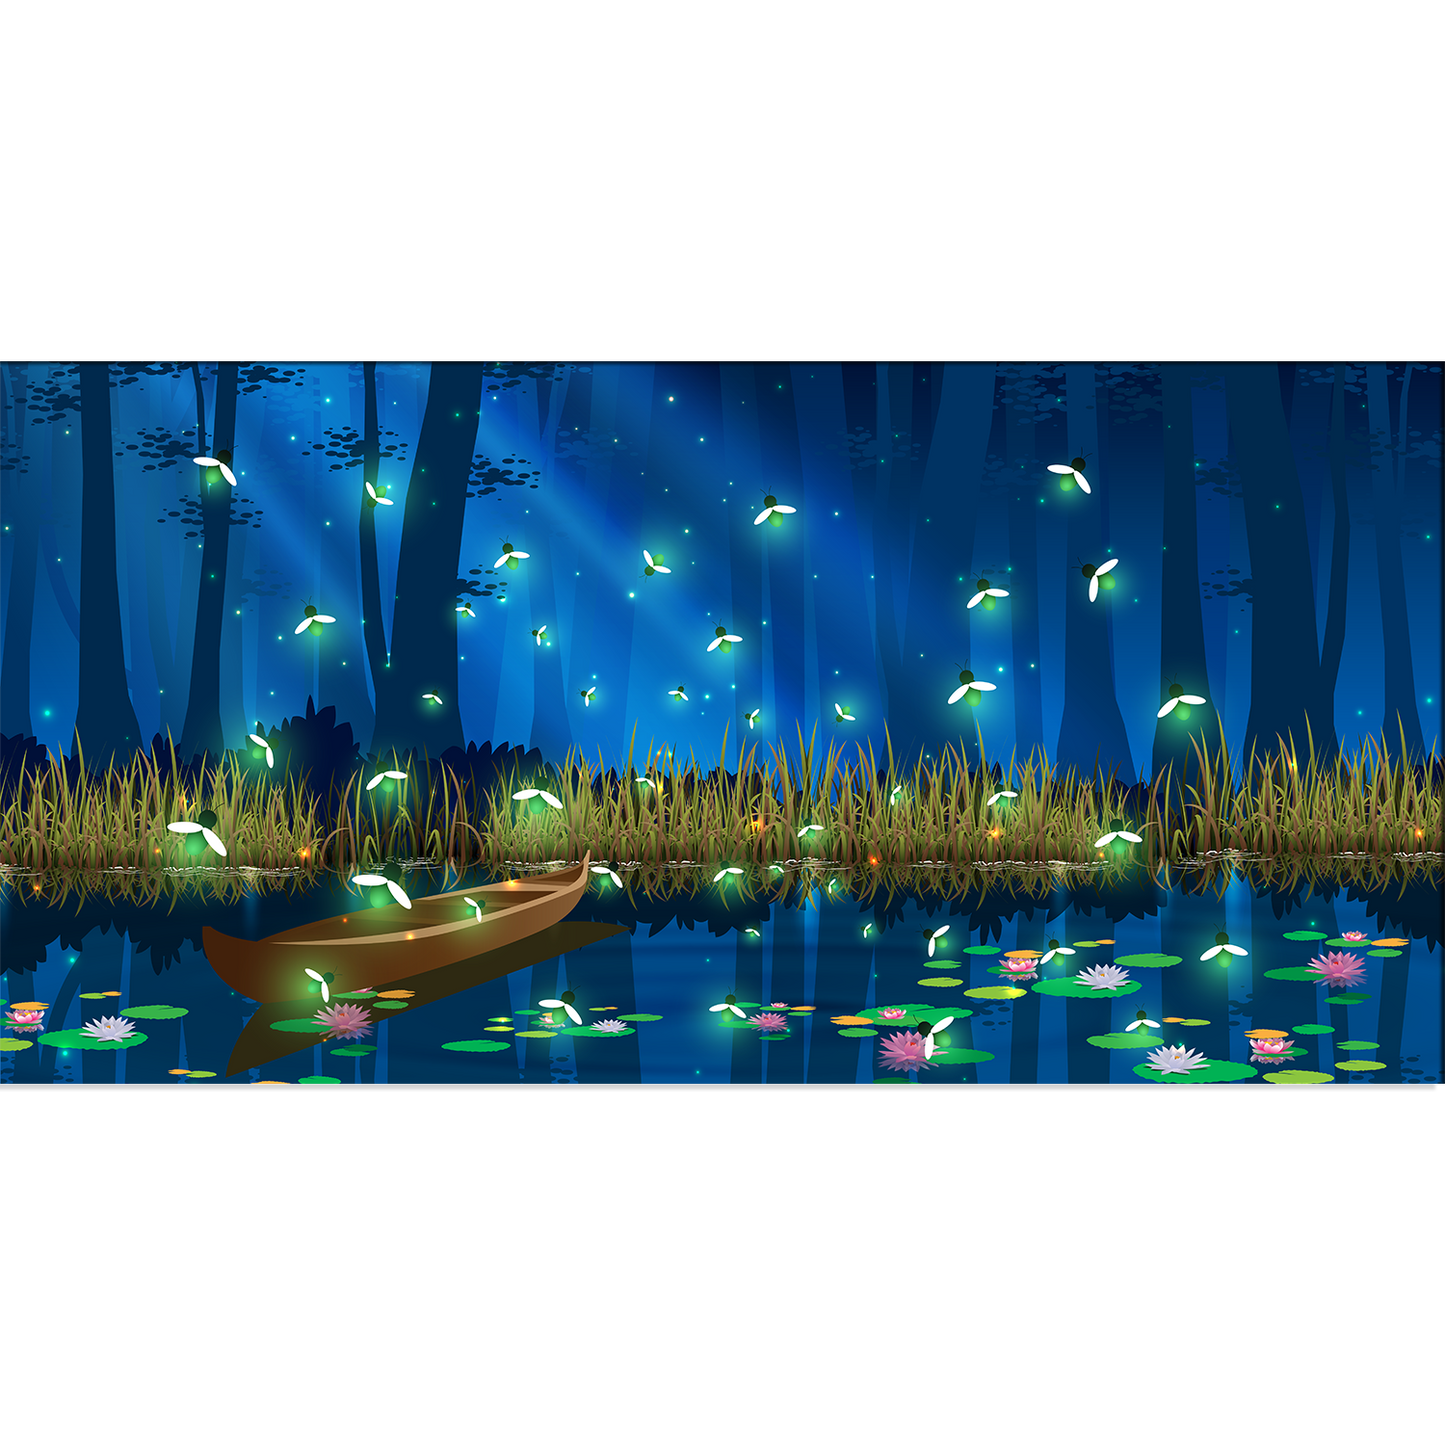 Firefly and Boat in the Full Moon Abstract Canvas Print Wall Painting